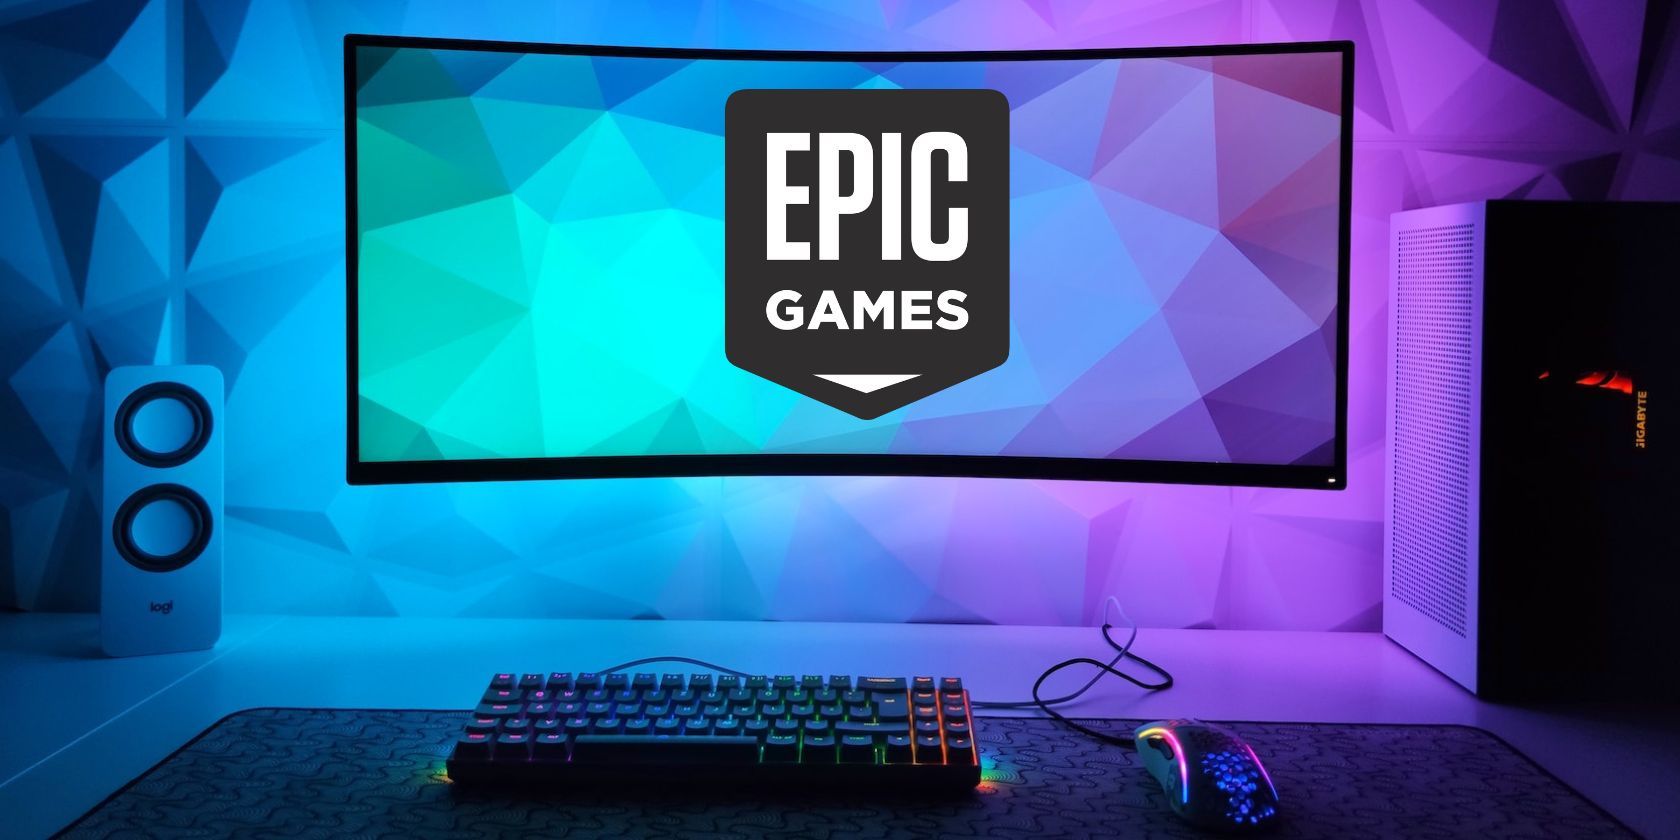 Can anyone explain how “Write” works?? Or what It does : r/EpicGamesPC